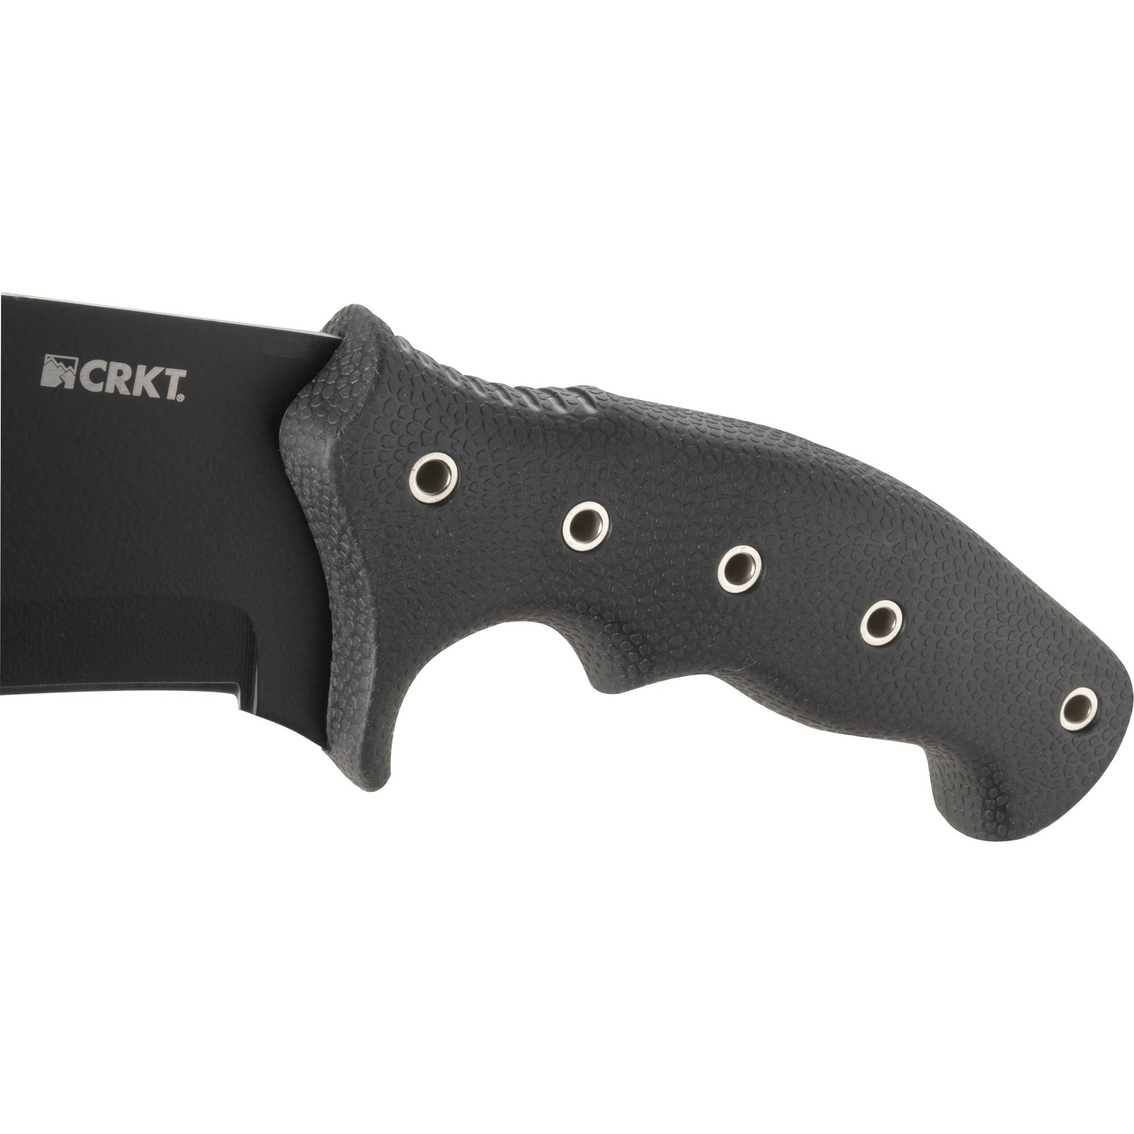 Columbia River Knife & Tool Chanceinhell Machete, Black, Lined Woven Sheath - Image 3 of 4